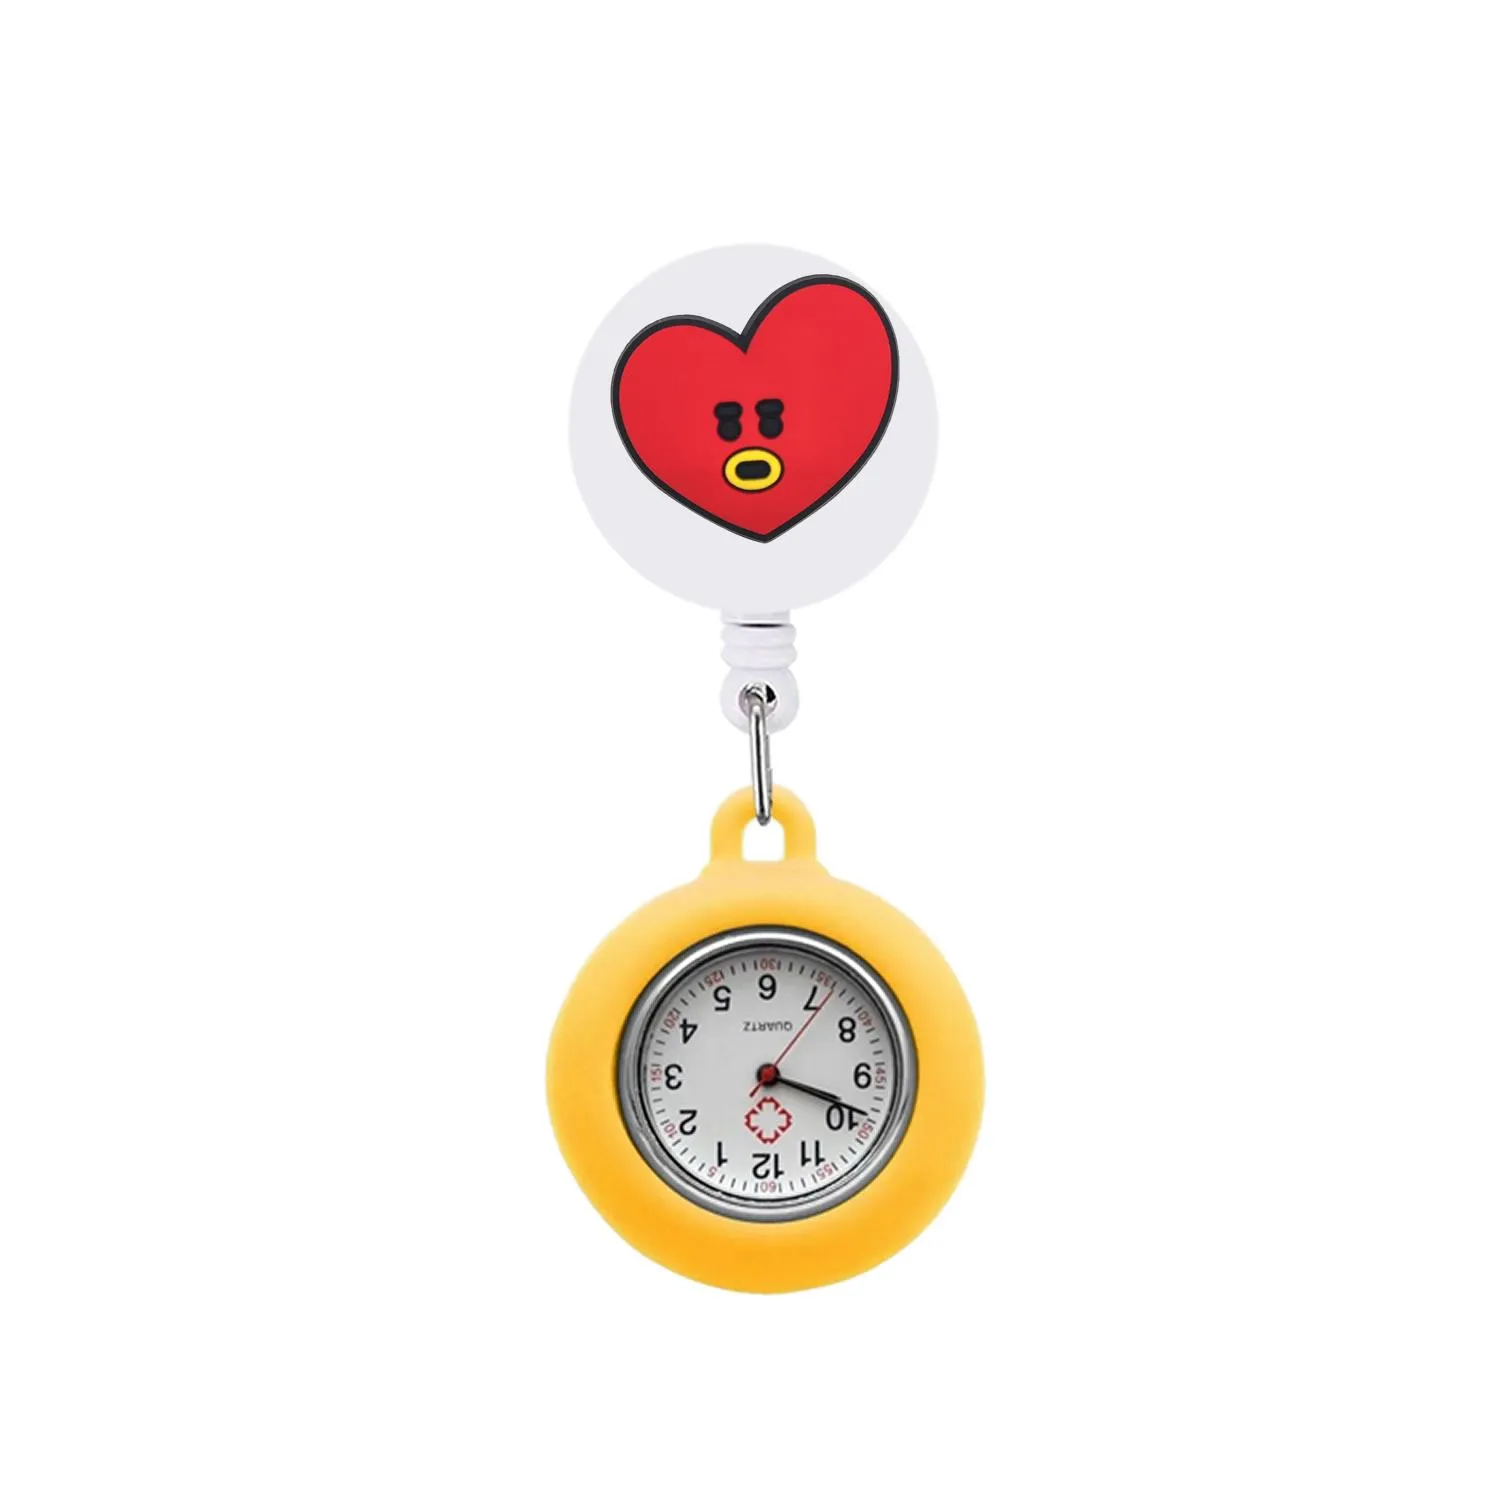 bt21 17 clip pocket watches brooch quartz movement stethoscope retractable fob watch nurse badge accessories with second hand lapel for nurses doctors clip-on hanging